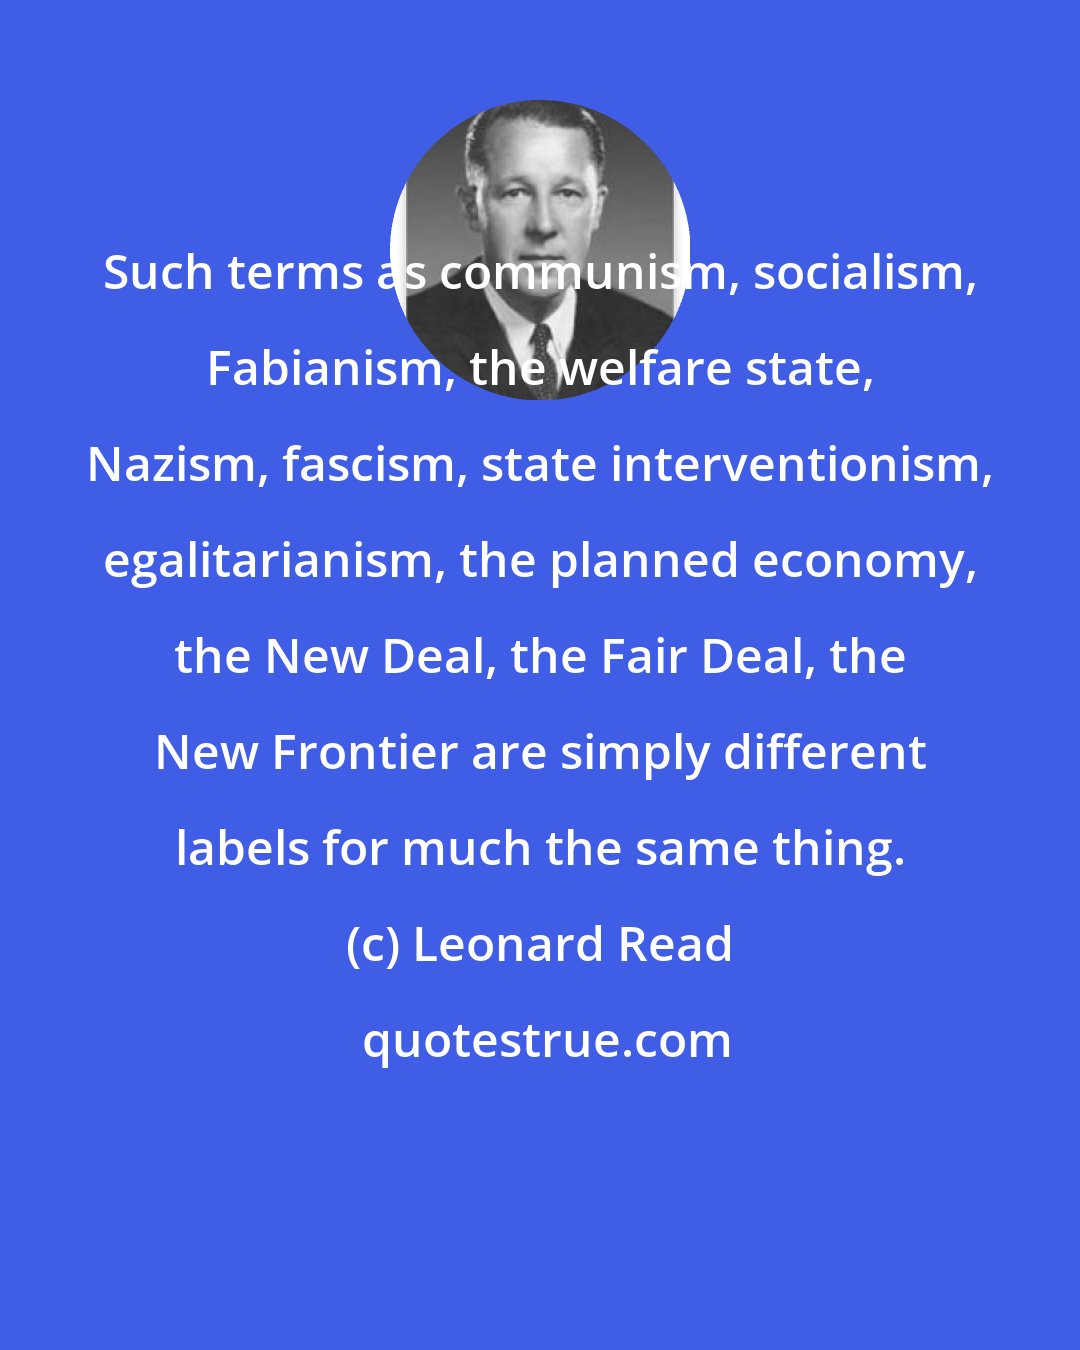 Leonard Read: Such terms as communism, socialism, Fabianism, the welfare state, Nazism, fascism, state interventionism, egalitarianism, the planned economy, the New Deal, the Fair Deal, the New Frontier are simply different labels for much the same thing.